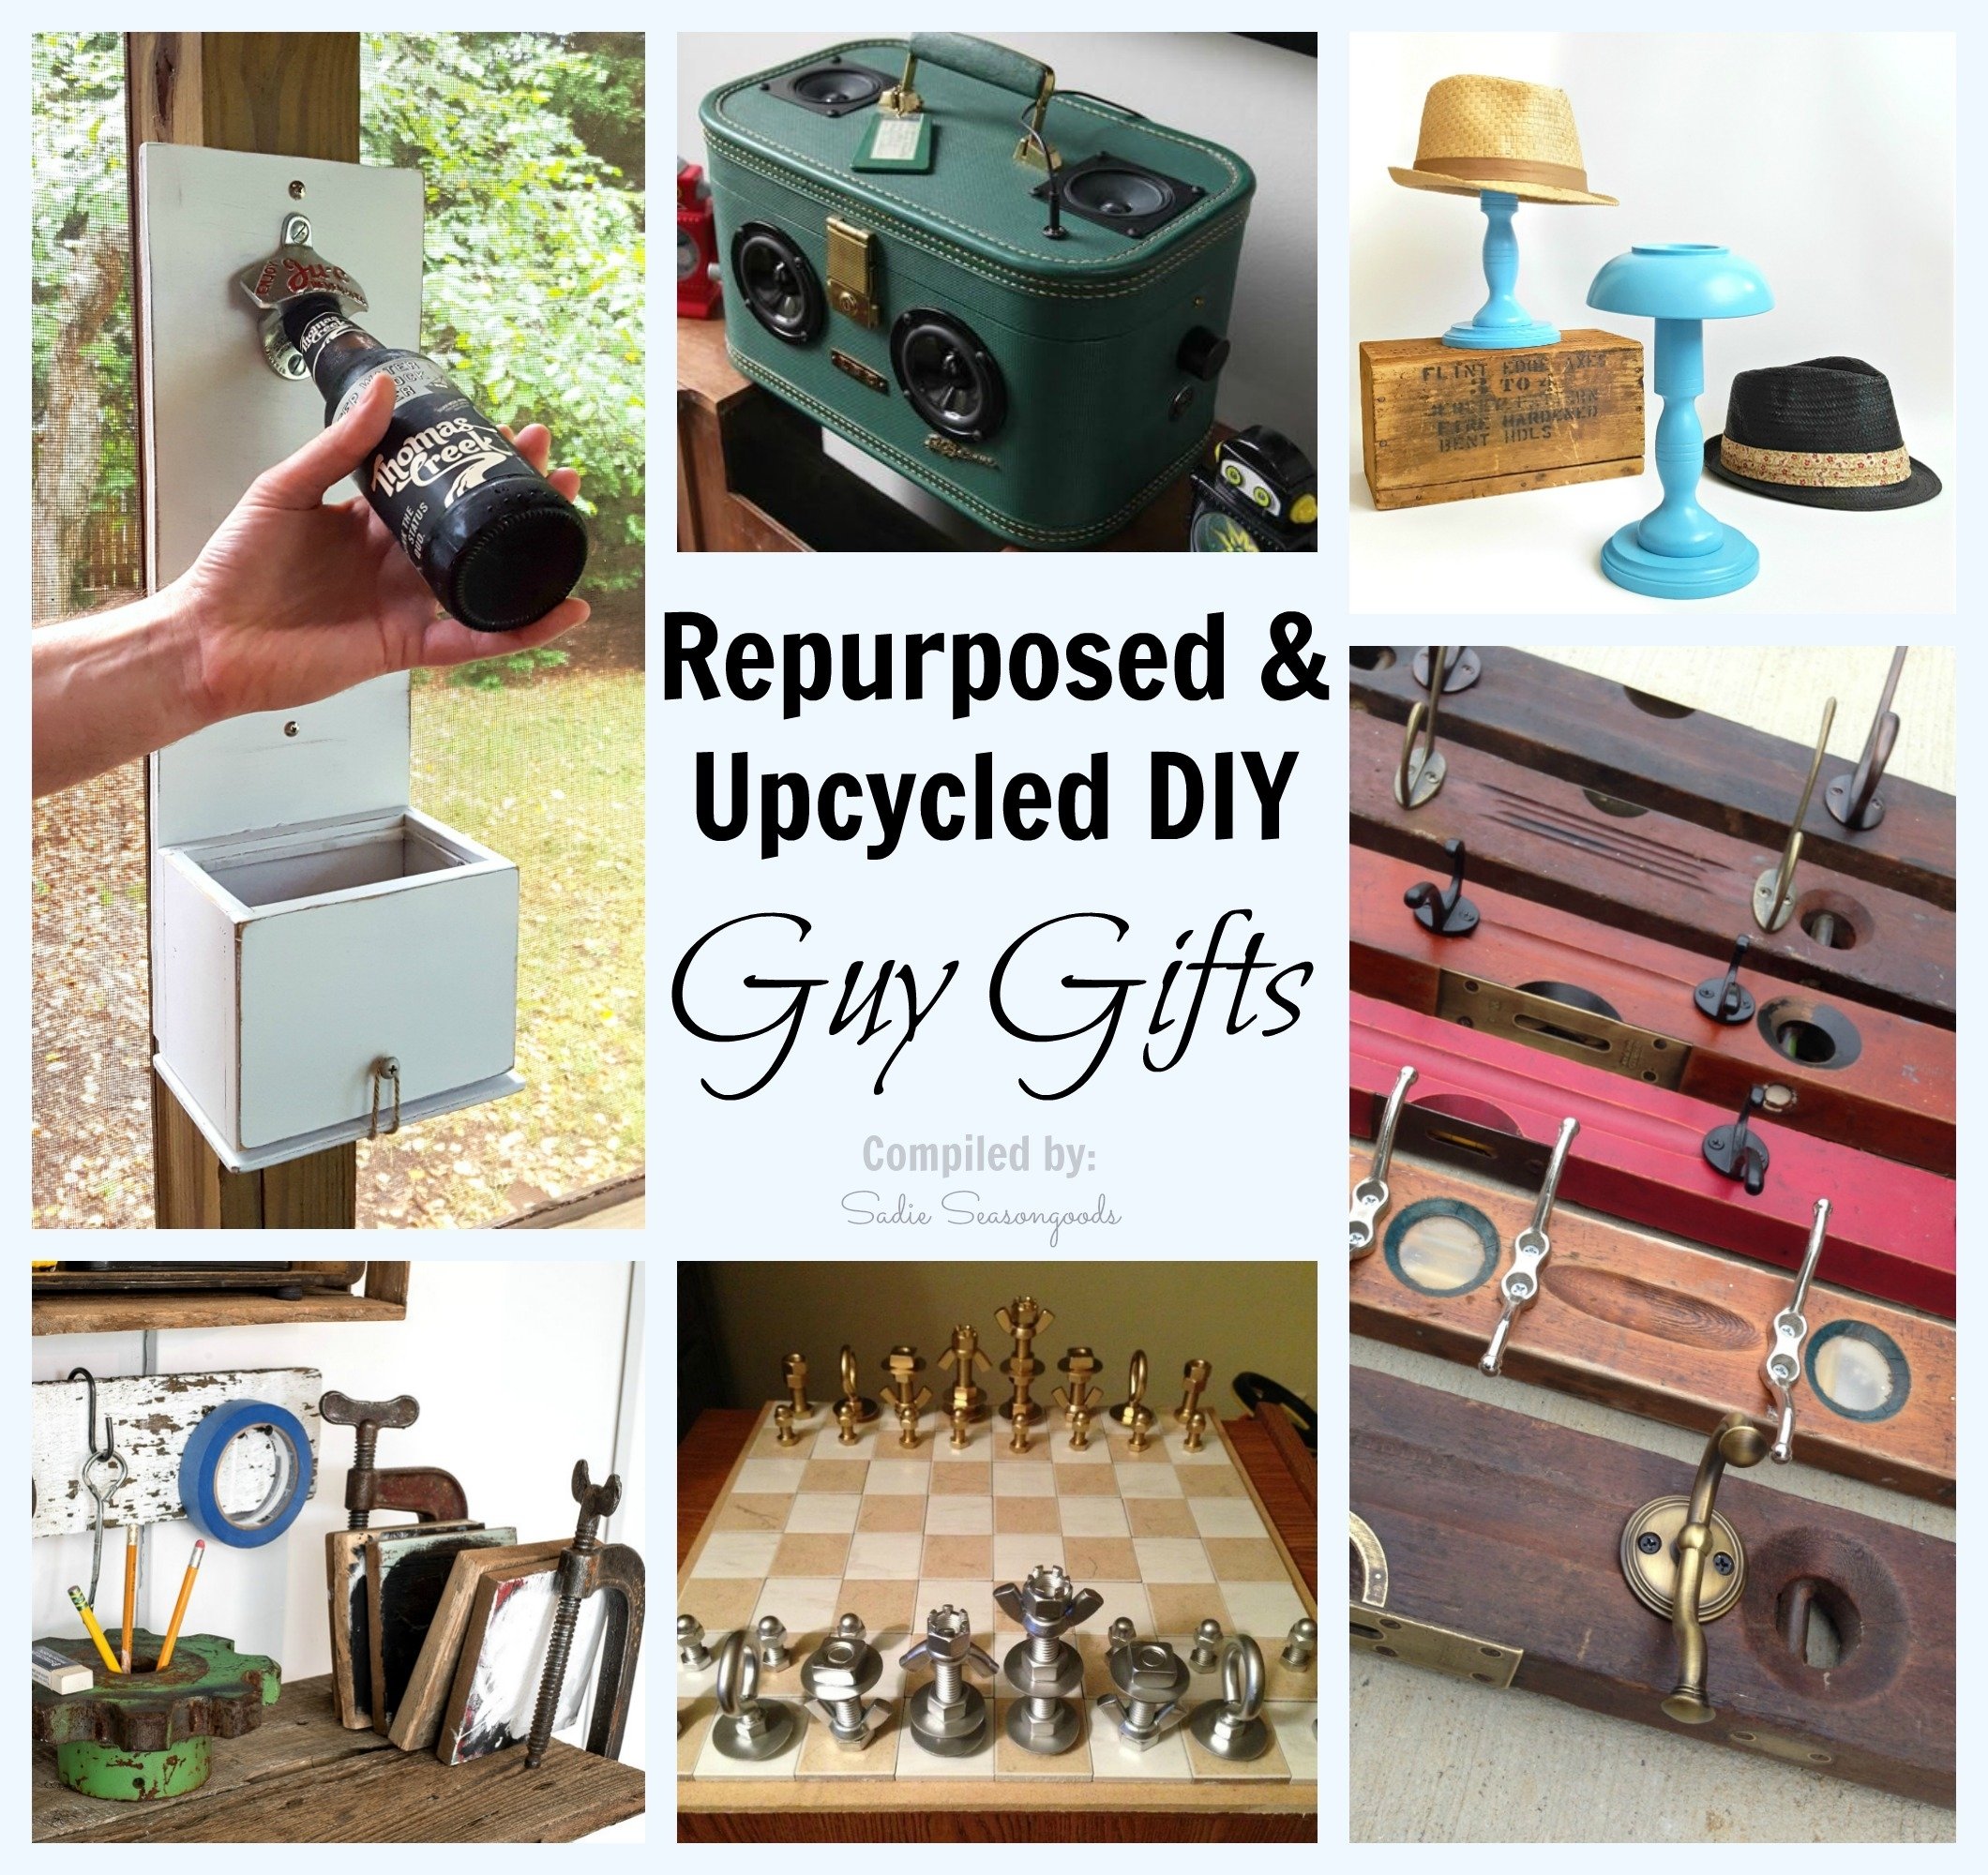 10 Nice Diy Gift Ideas For Men diy repurposed and upcycled gift ideas for guys men 3 2022